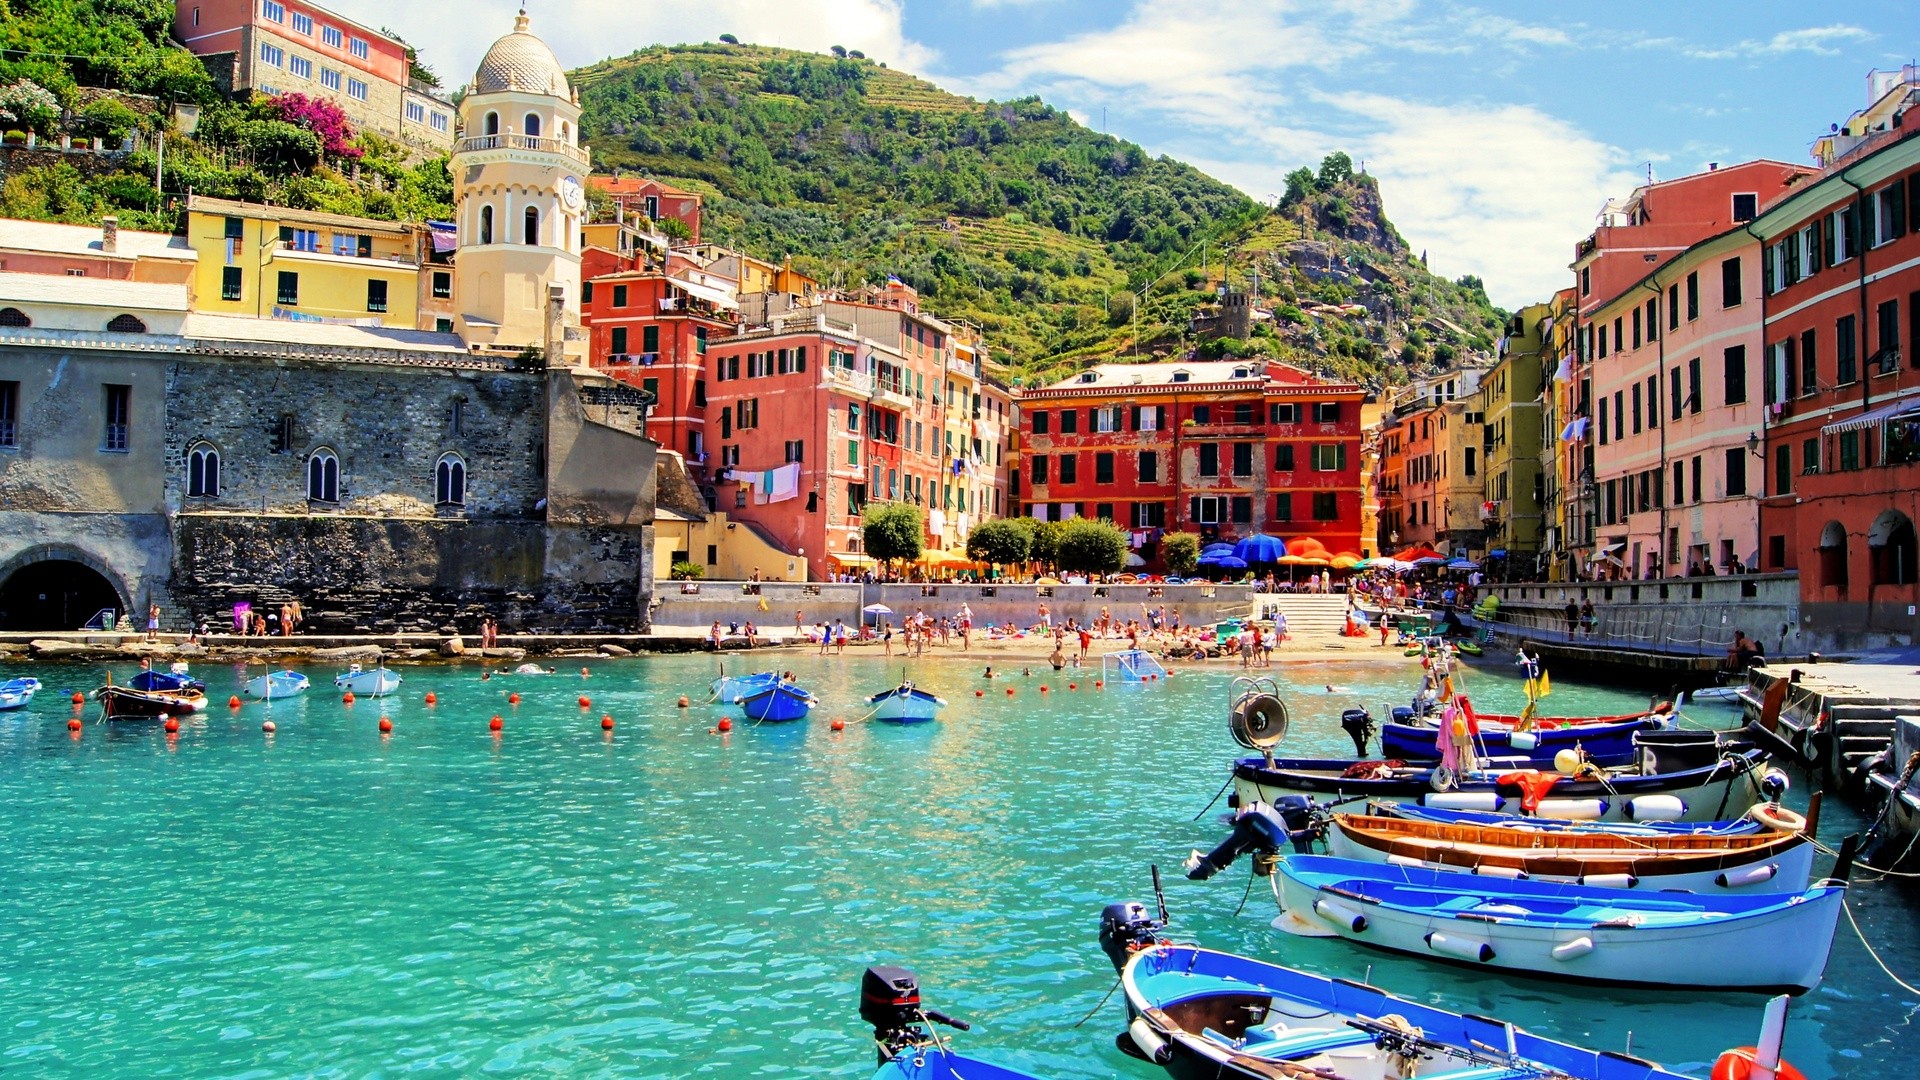 City Italy Vernazza Town Cityscape Boat People 1920x1080